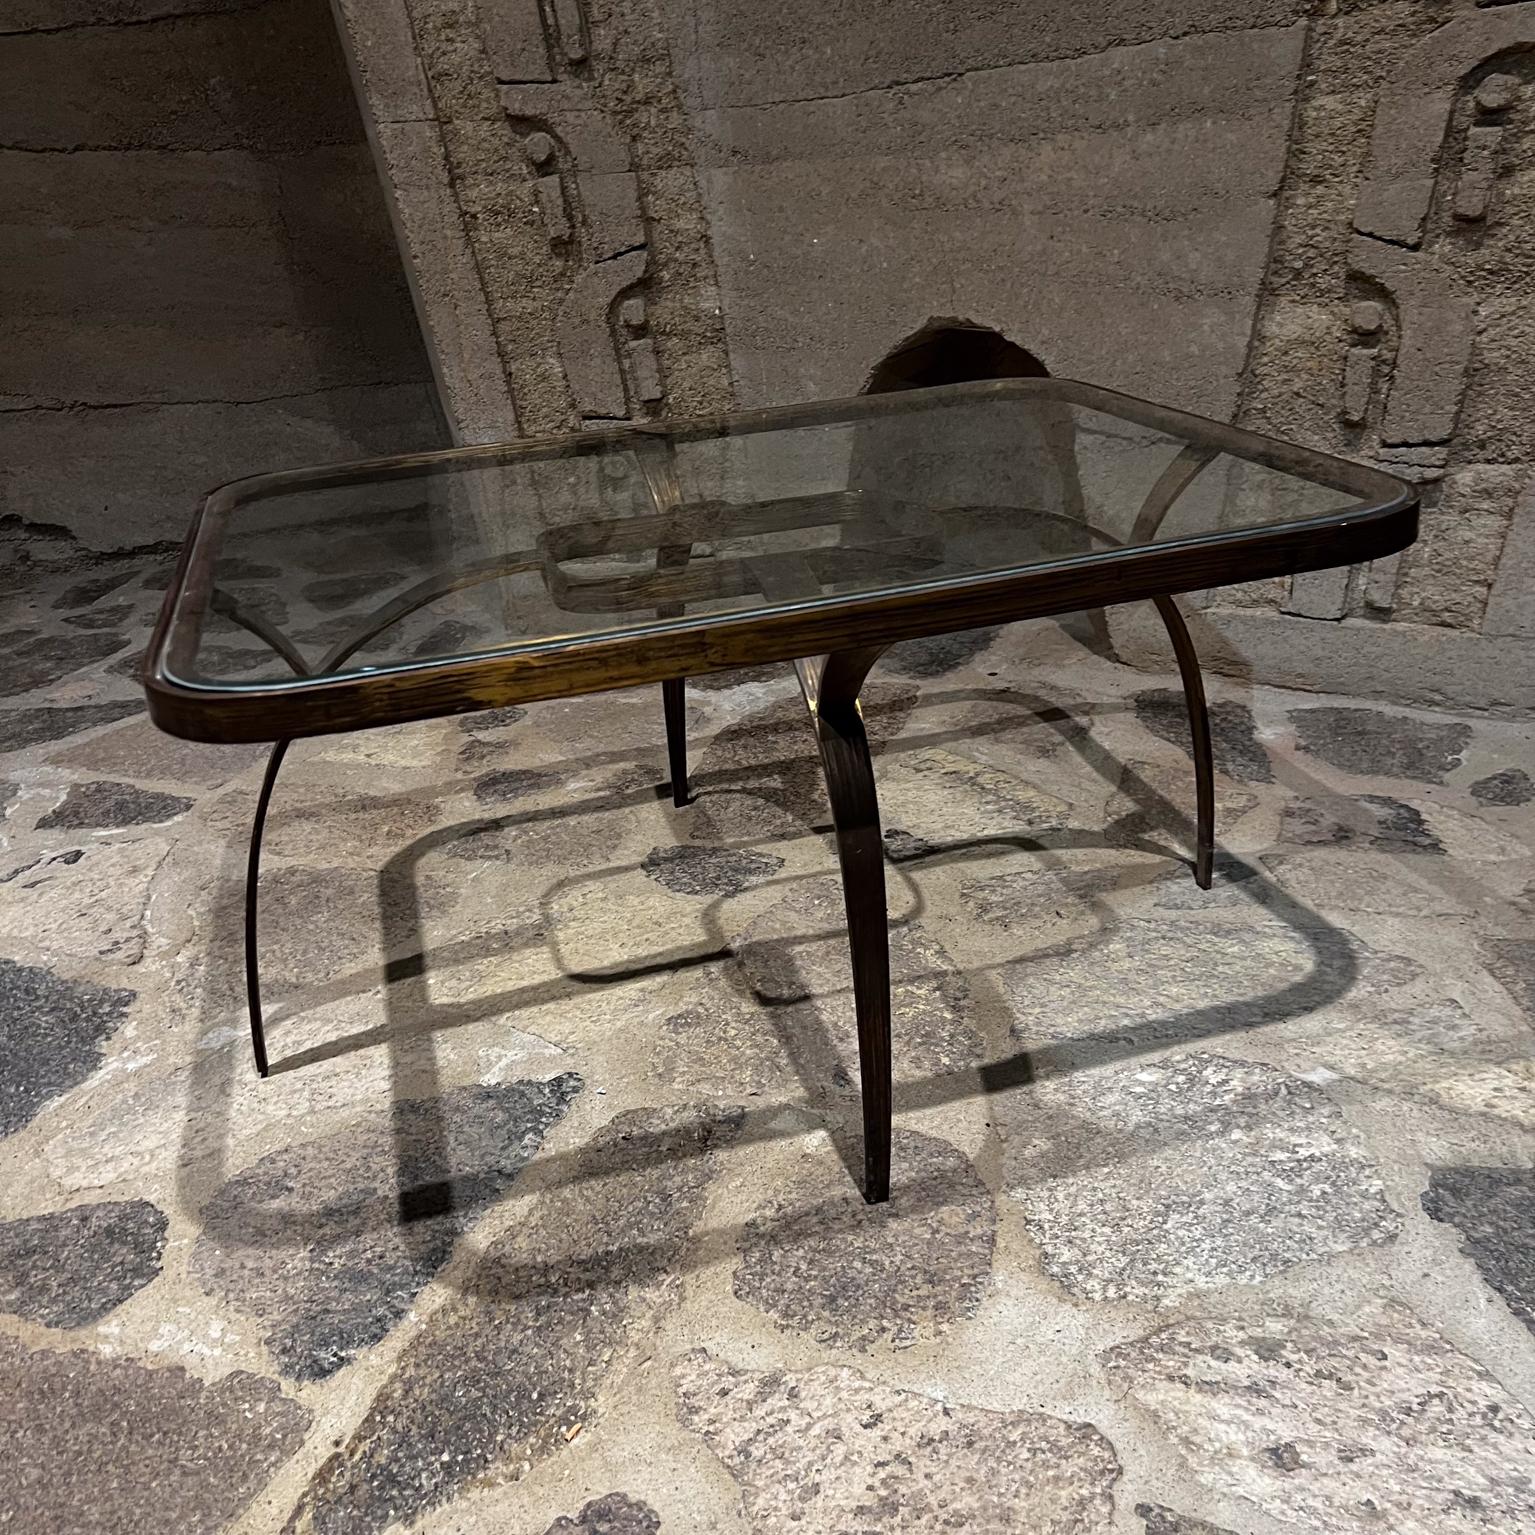 1950s Sculptural Bronze Coffee Side Table Arturo Pani Mexico City For Sale 5